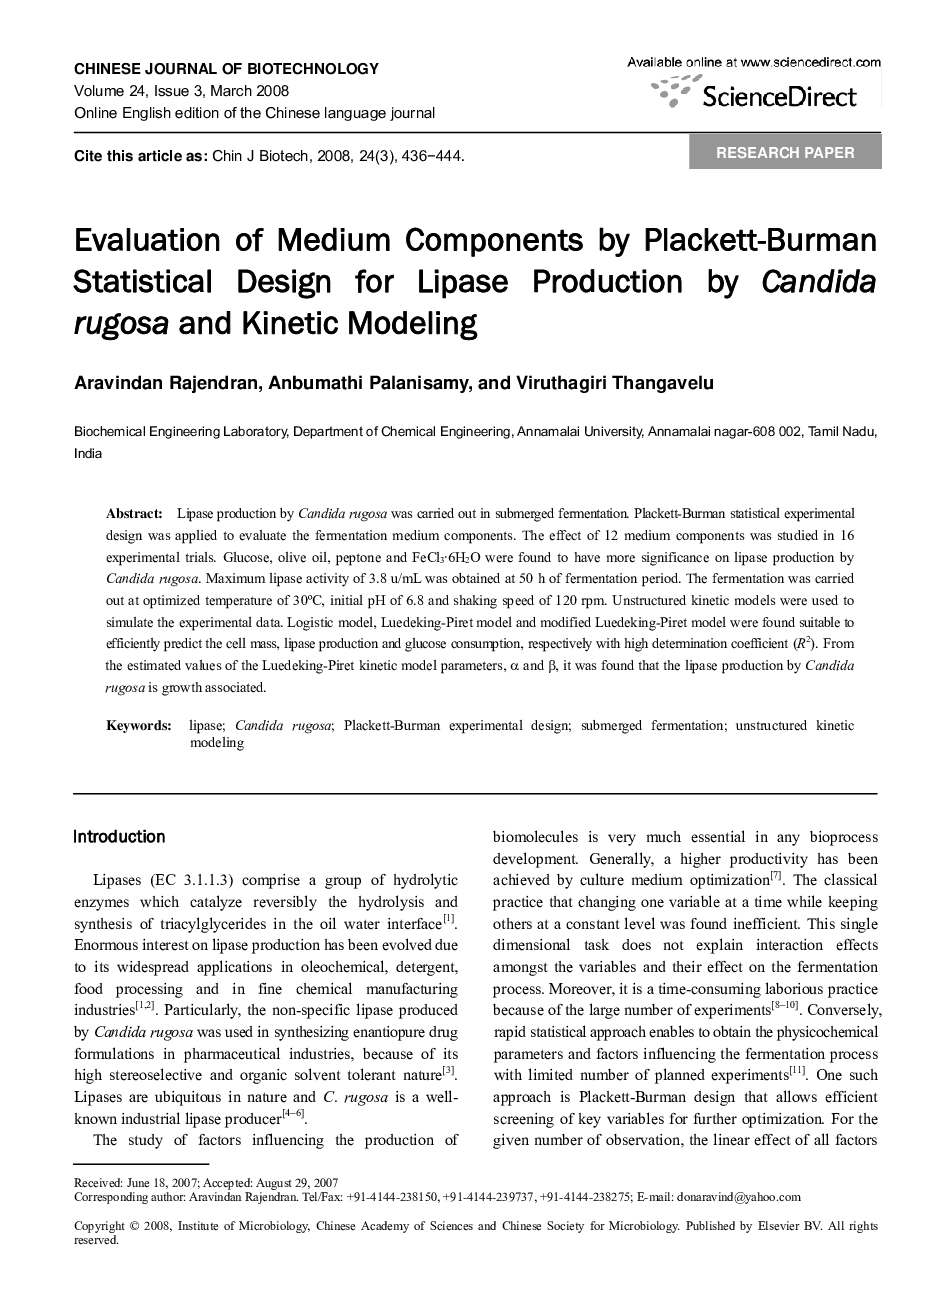 Evaluation of Medium Components by Plackett-Burman Statistical Design for Lipase Production by Candida rugosa and Kinetic Modeling